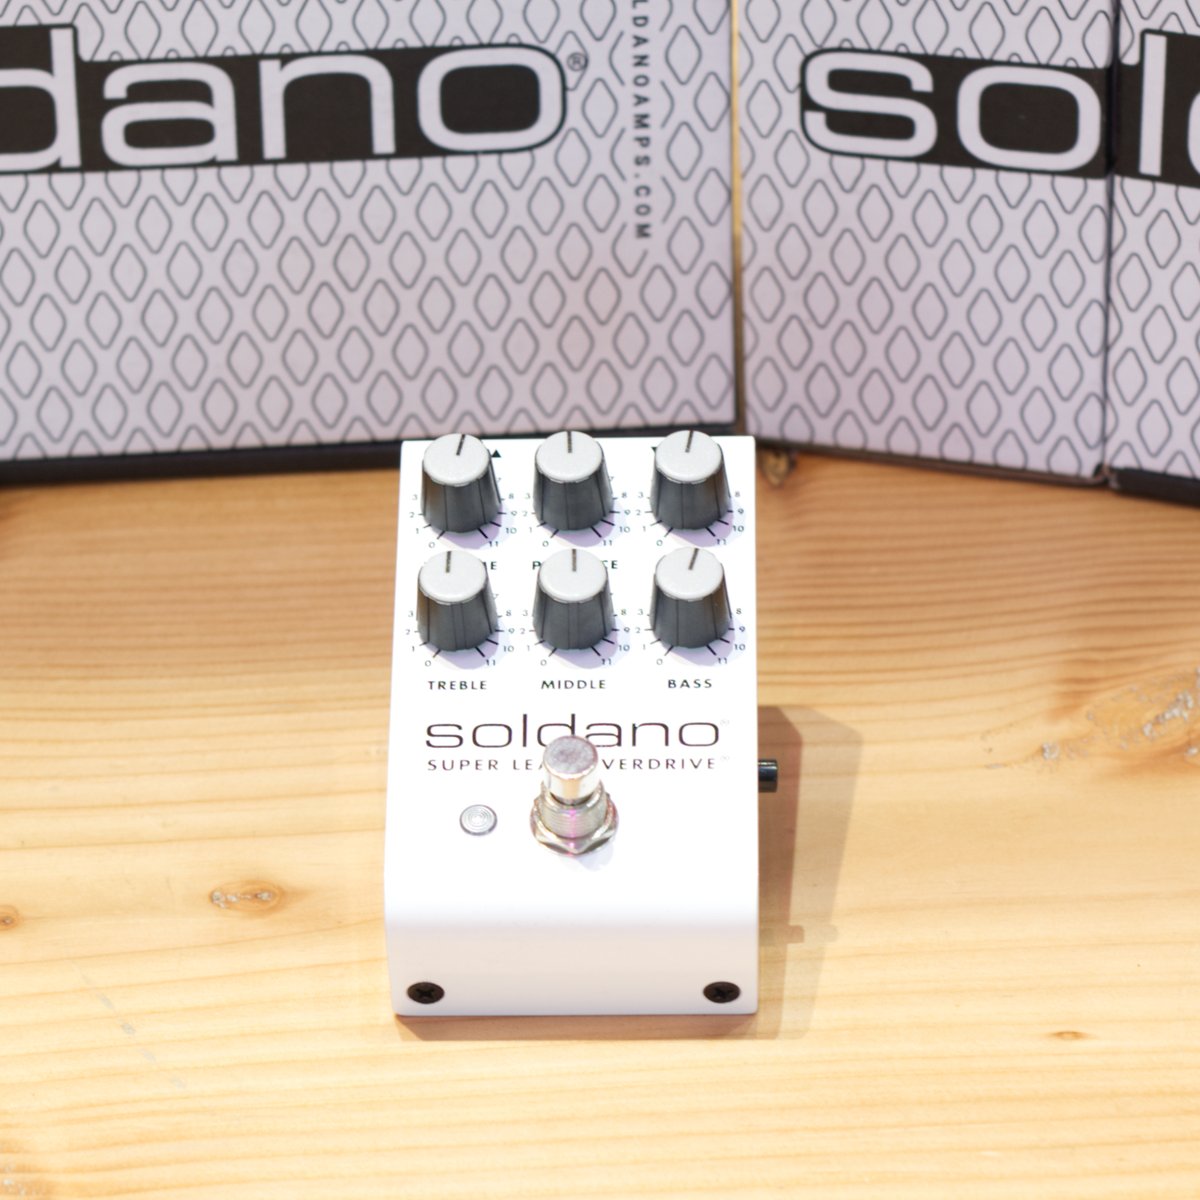 Here is the new Soldano SLO pedal, it captures the legendary lead tones of the SLO-100, in a pedal form ...
#groovestreet98bxl #groovestreet98 #groovestreet #thebrusselsguitarshop #brusselsguitarshop #guitarshopbxl #guitarshop
#soldanocustomamplification #itmightgetloud #soldano